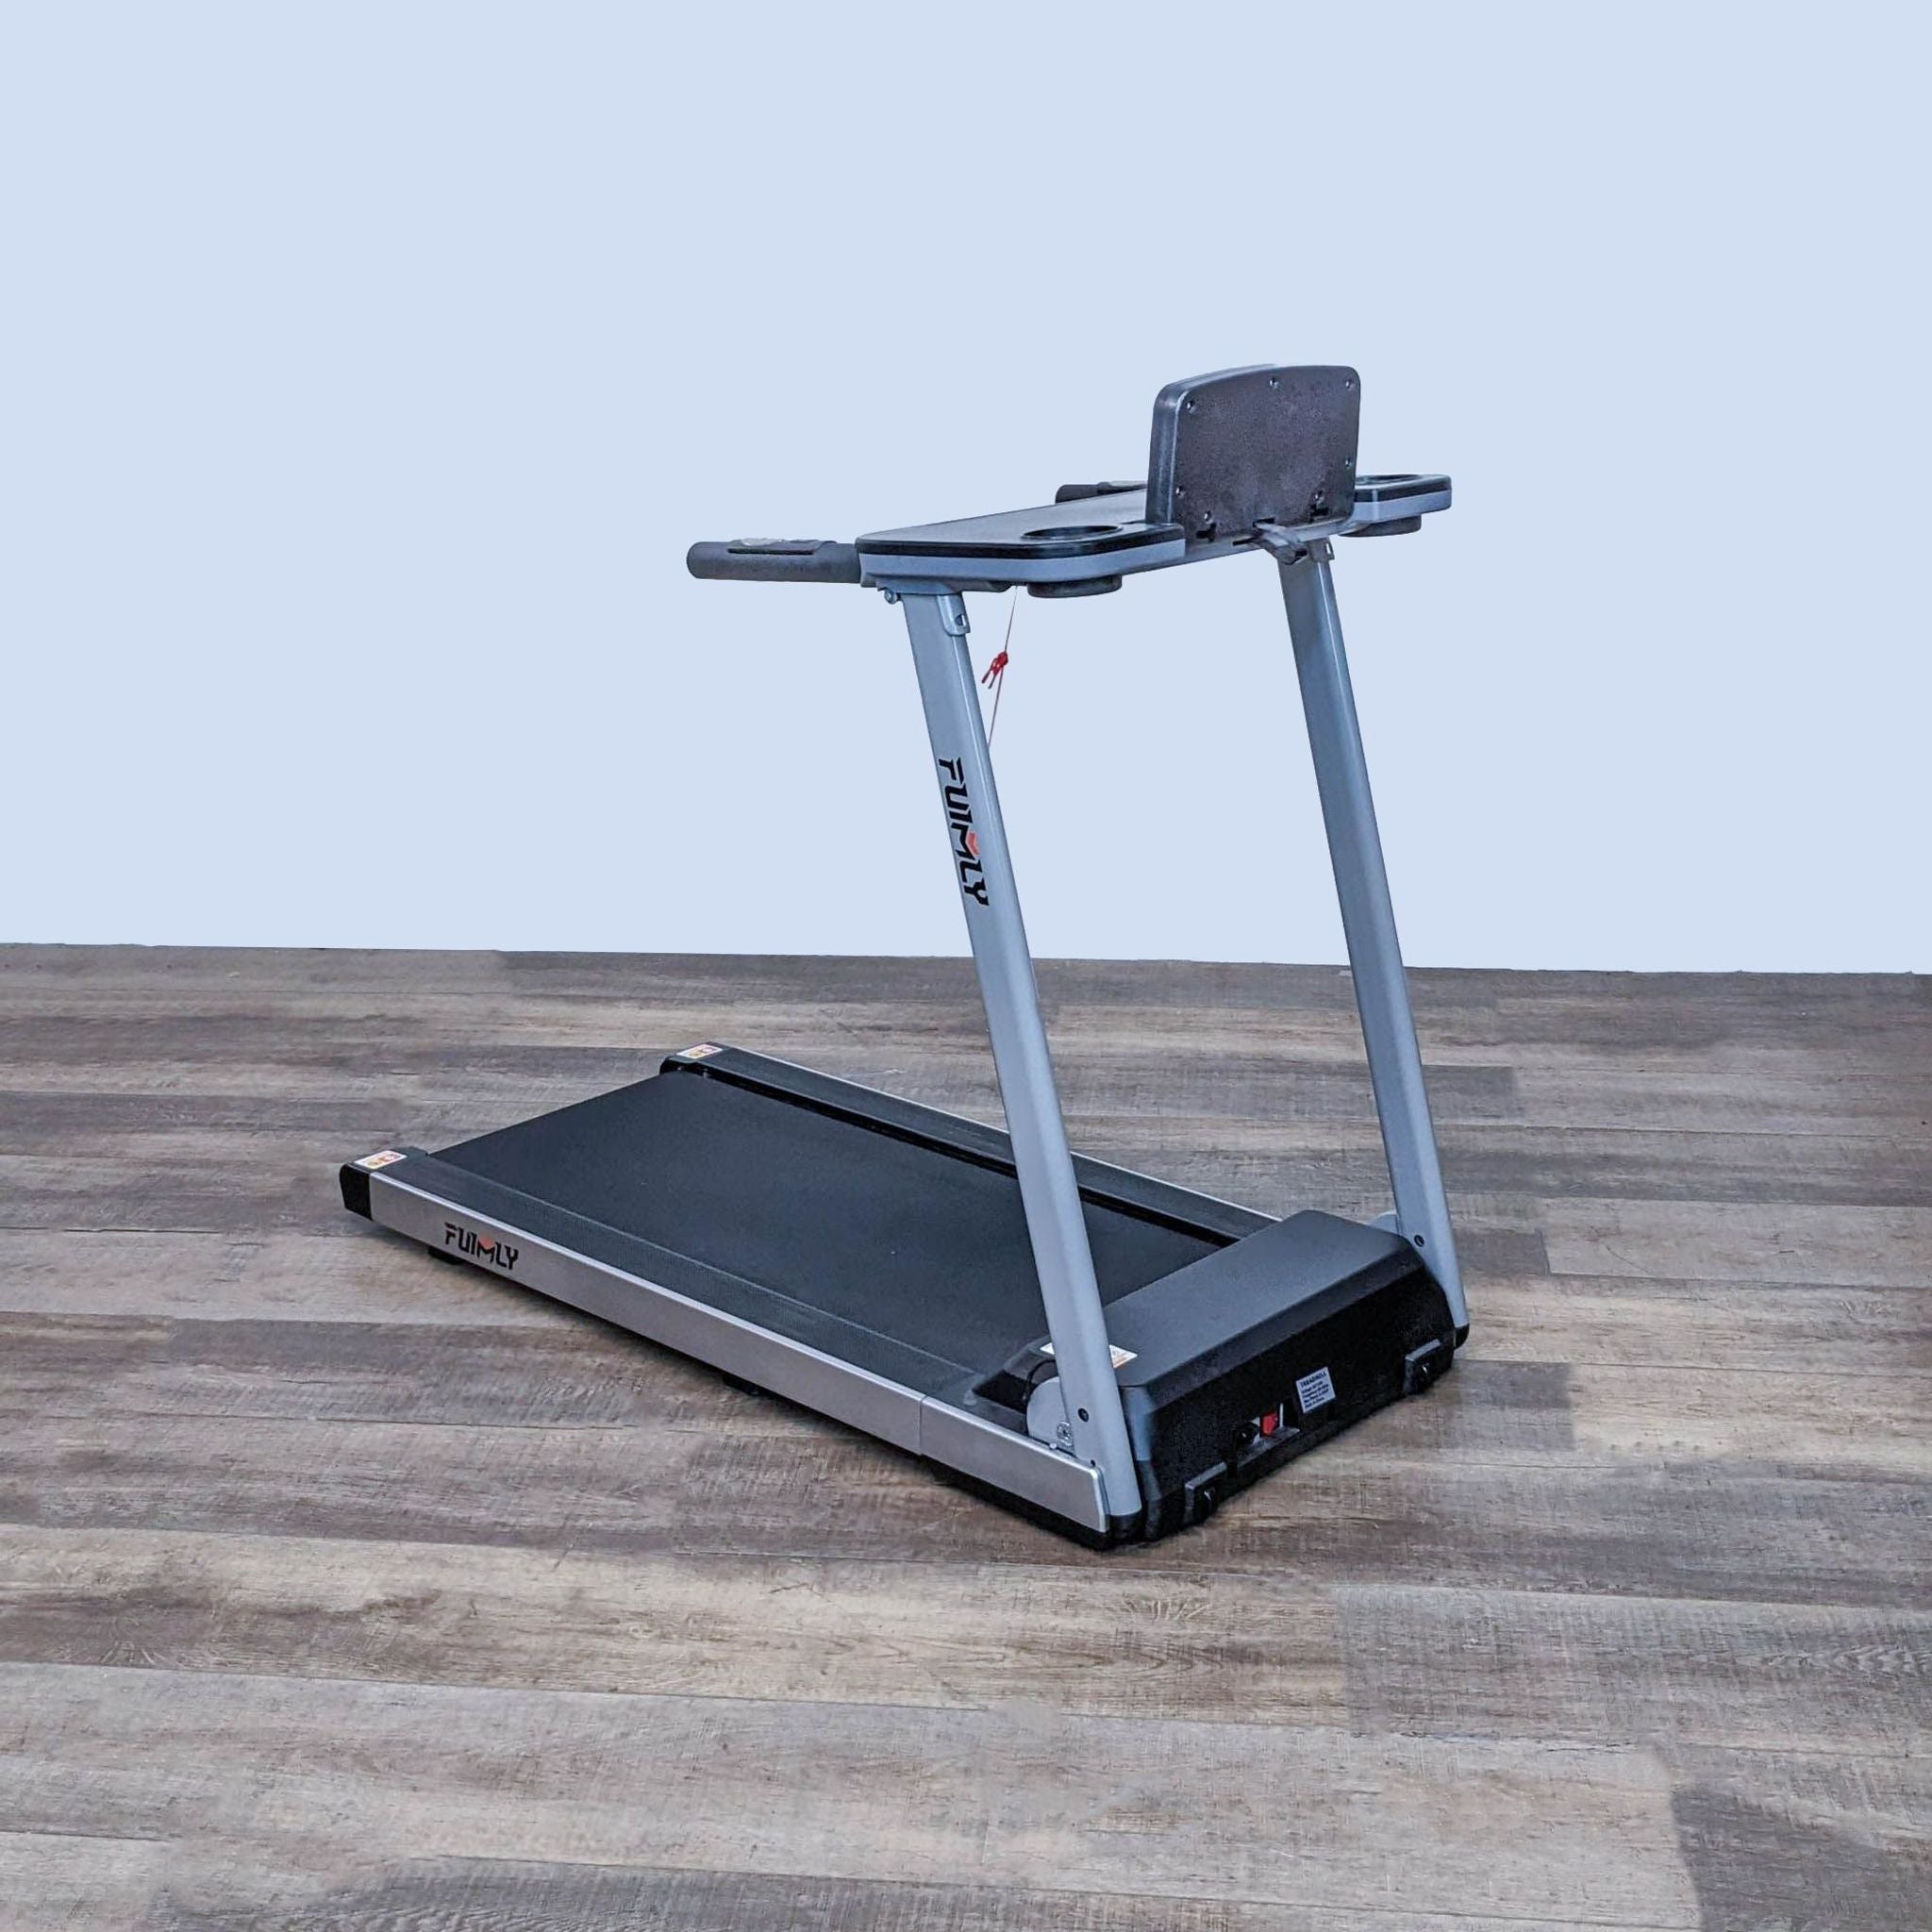 Alt: Compact Funmily brand treadmill on wooden floor, folded platform with grey support frame.